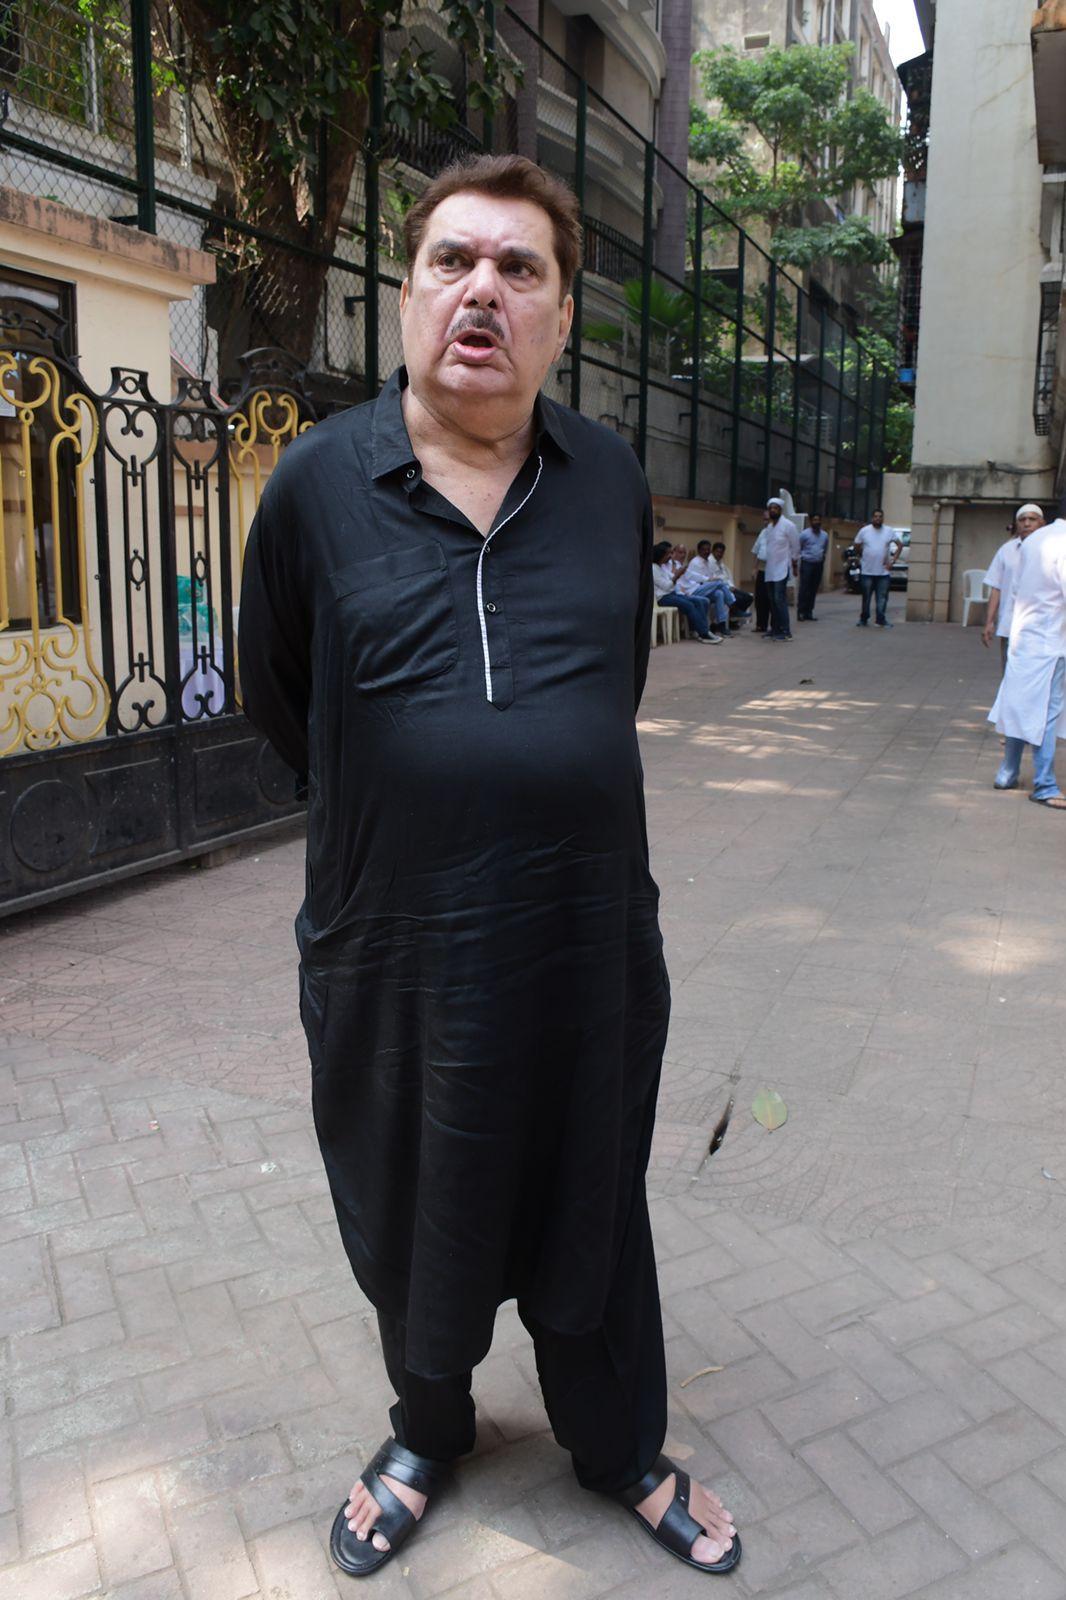 Raza Murad attended the funeral to pay his final respect